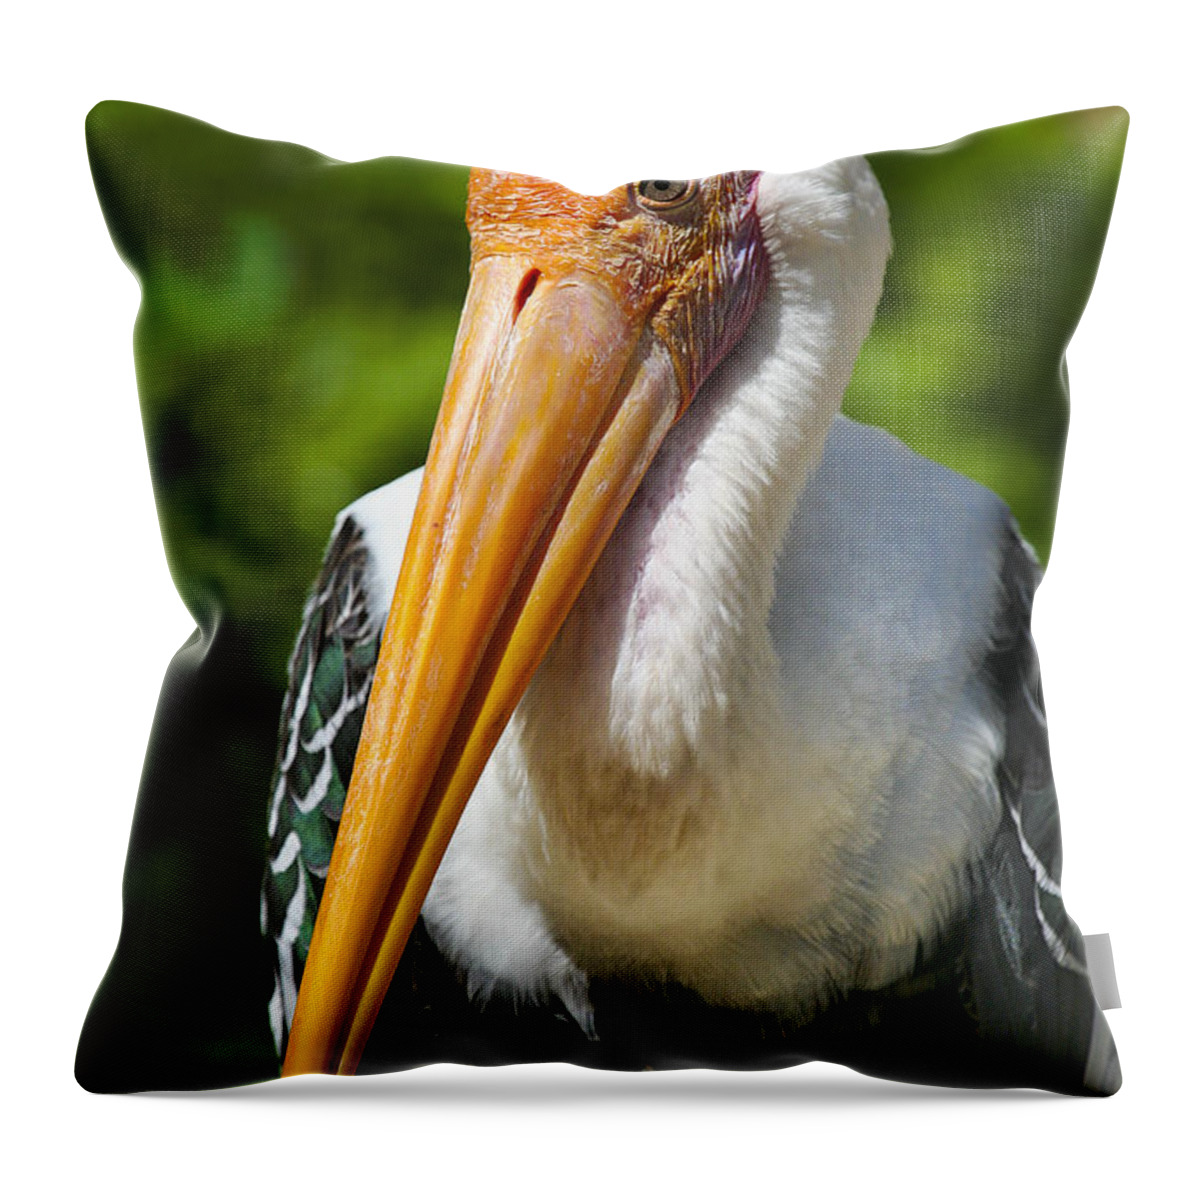 Animals Throw Pillow featuring the photograph Painted Stork by Timothy Hacker